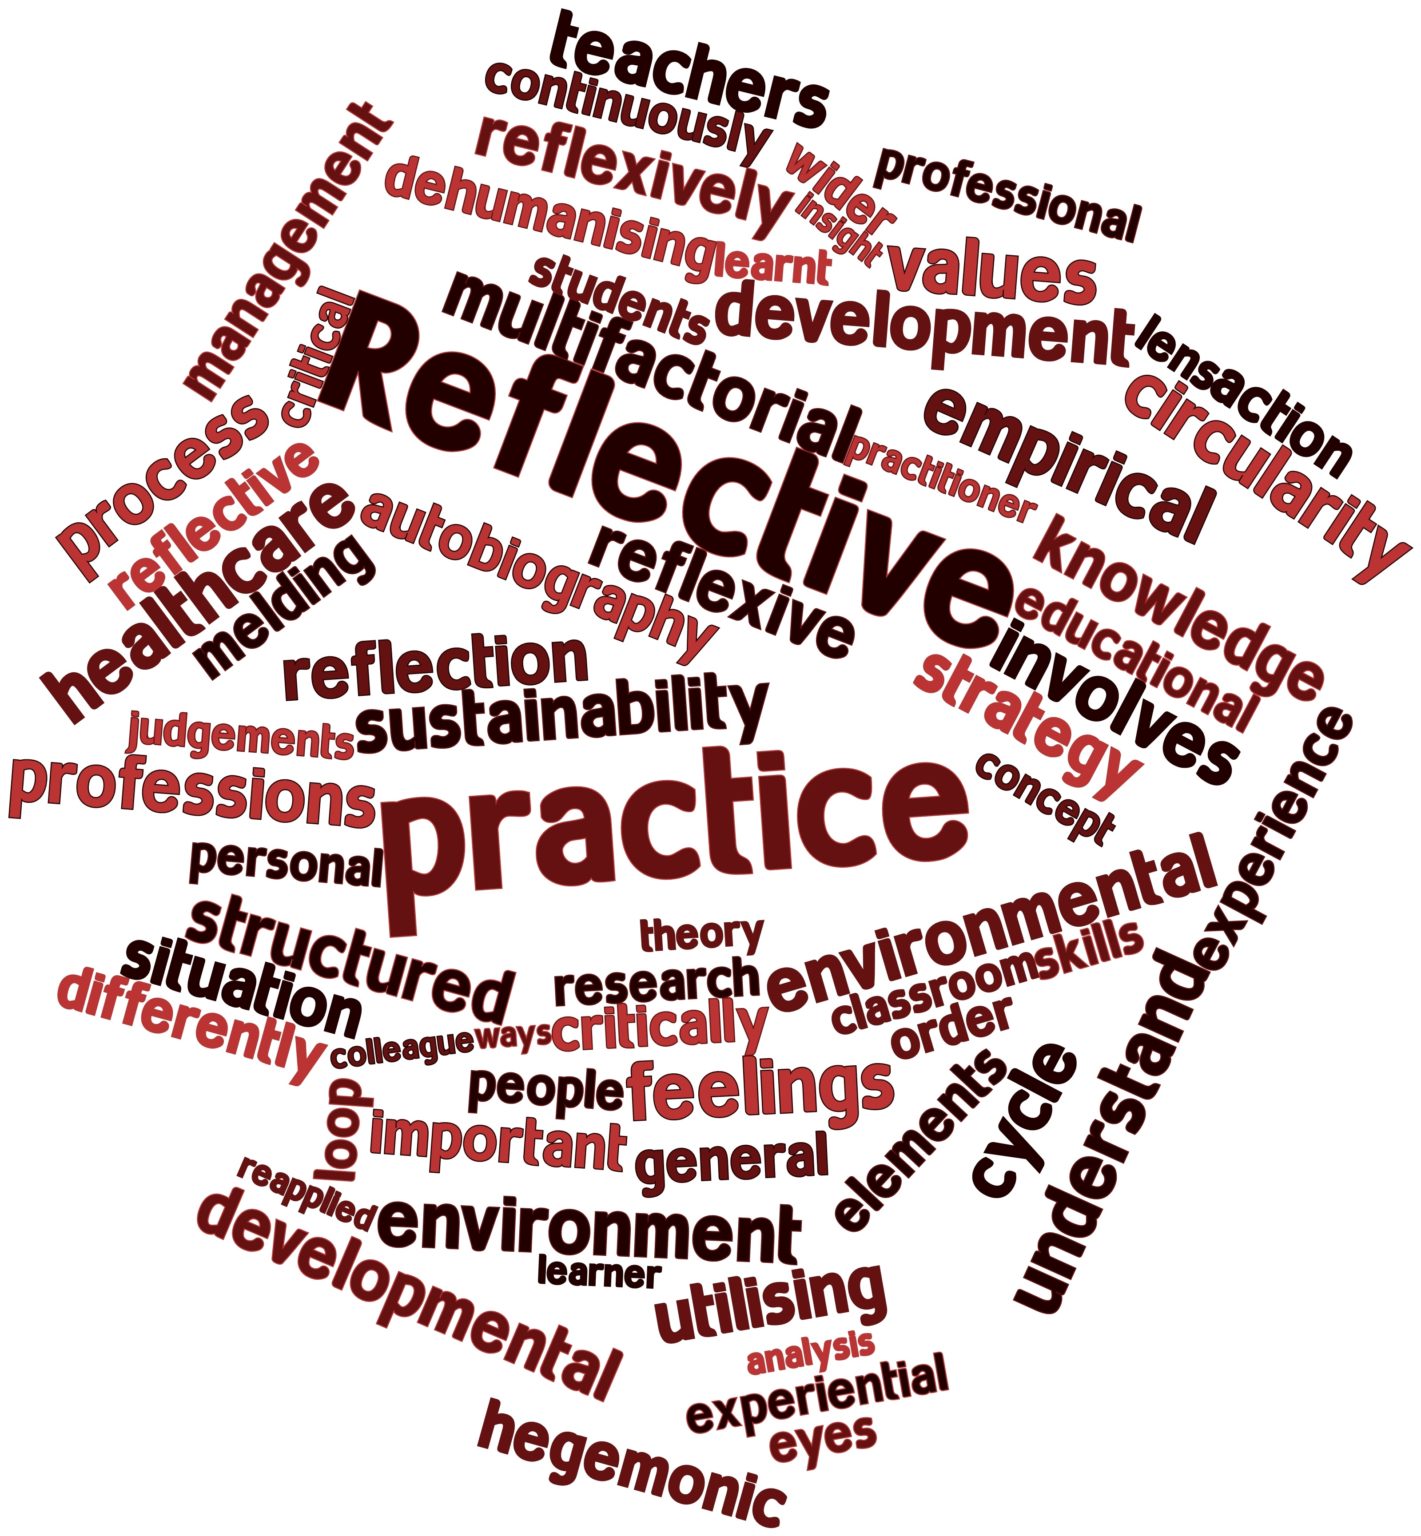 reflecting-on-the-effectiveness-of-reflective-practice-society-of